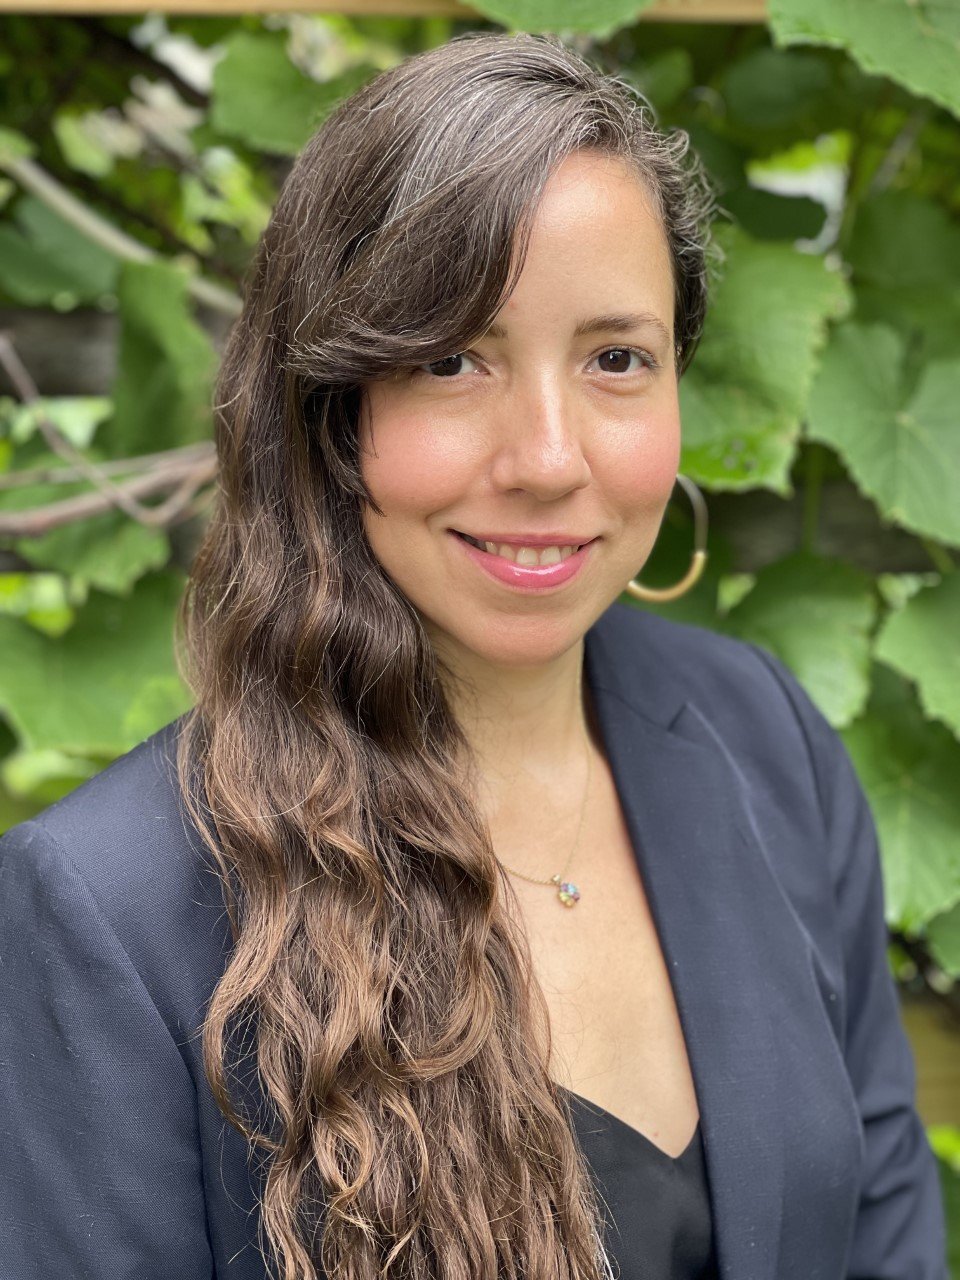 Mayra Estrella, PhD, assistant professor in the department of epidemiology, human genetics, and environmental sciences at UTHealth Houston School of Public Health